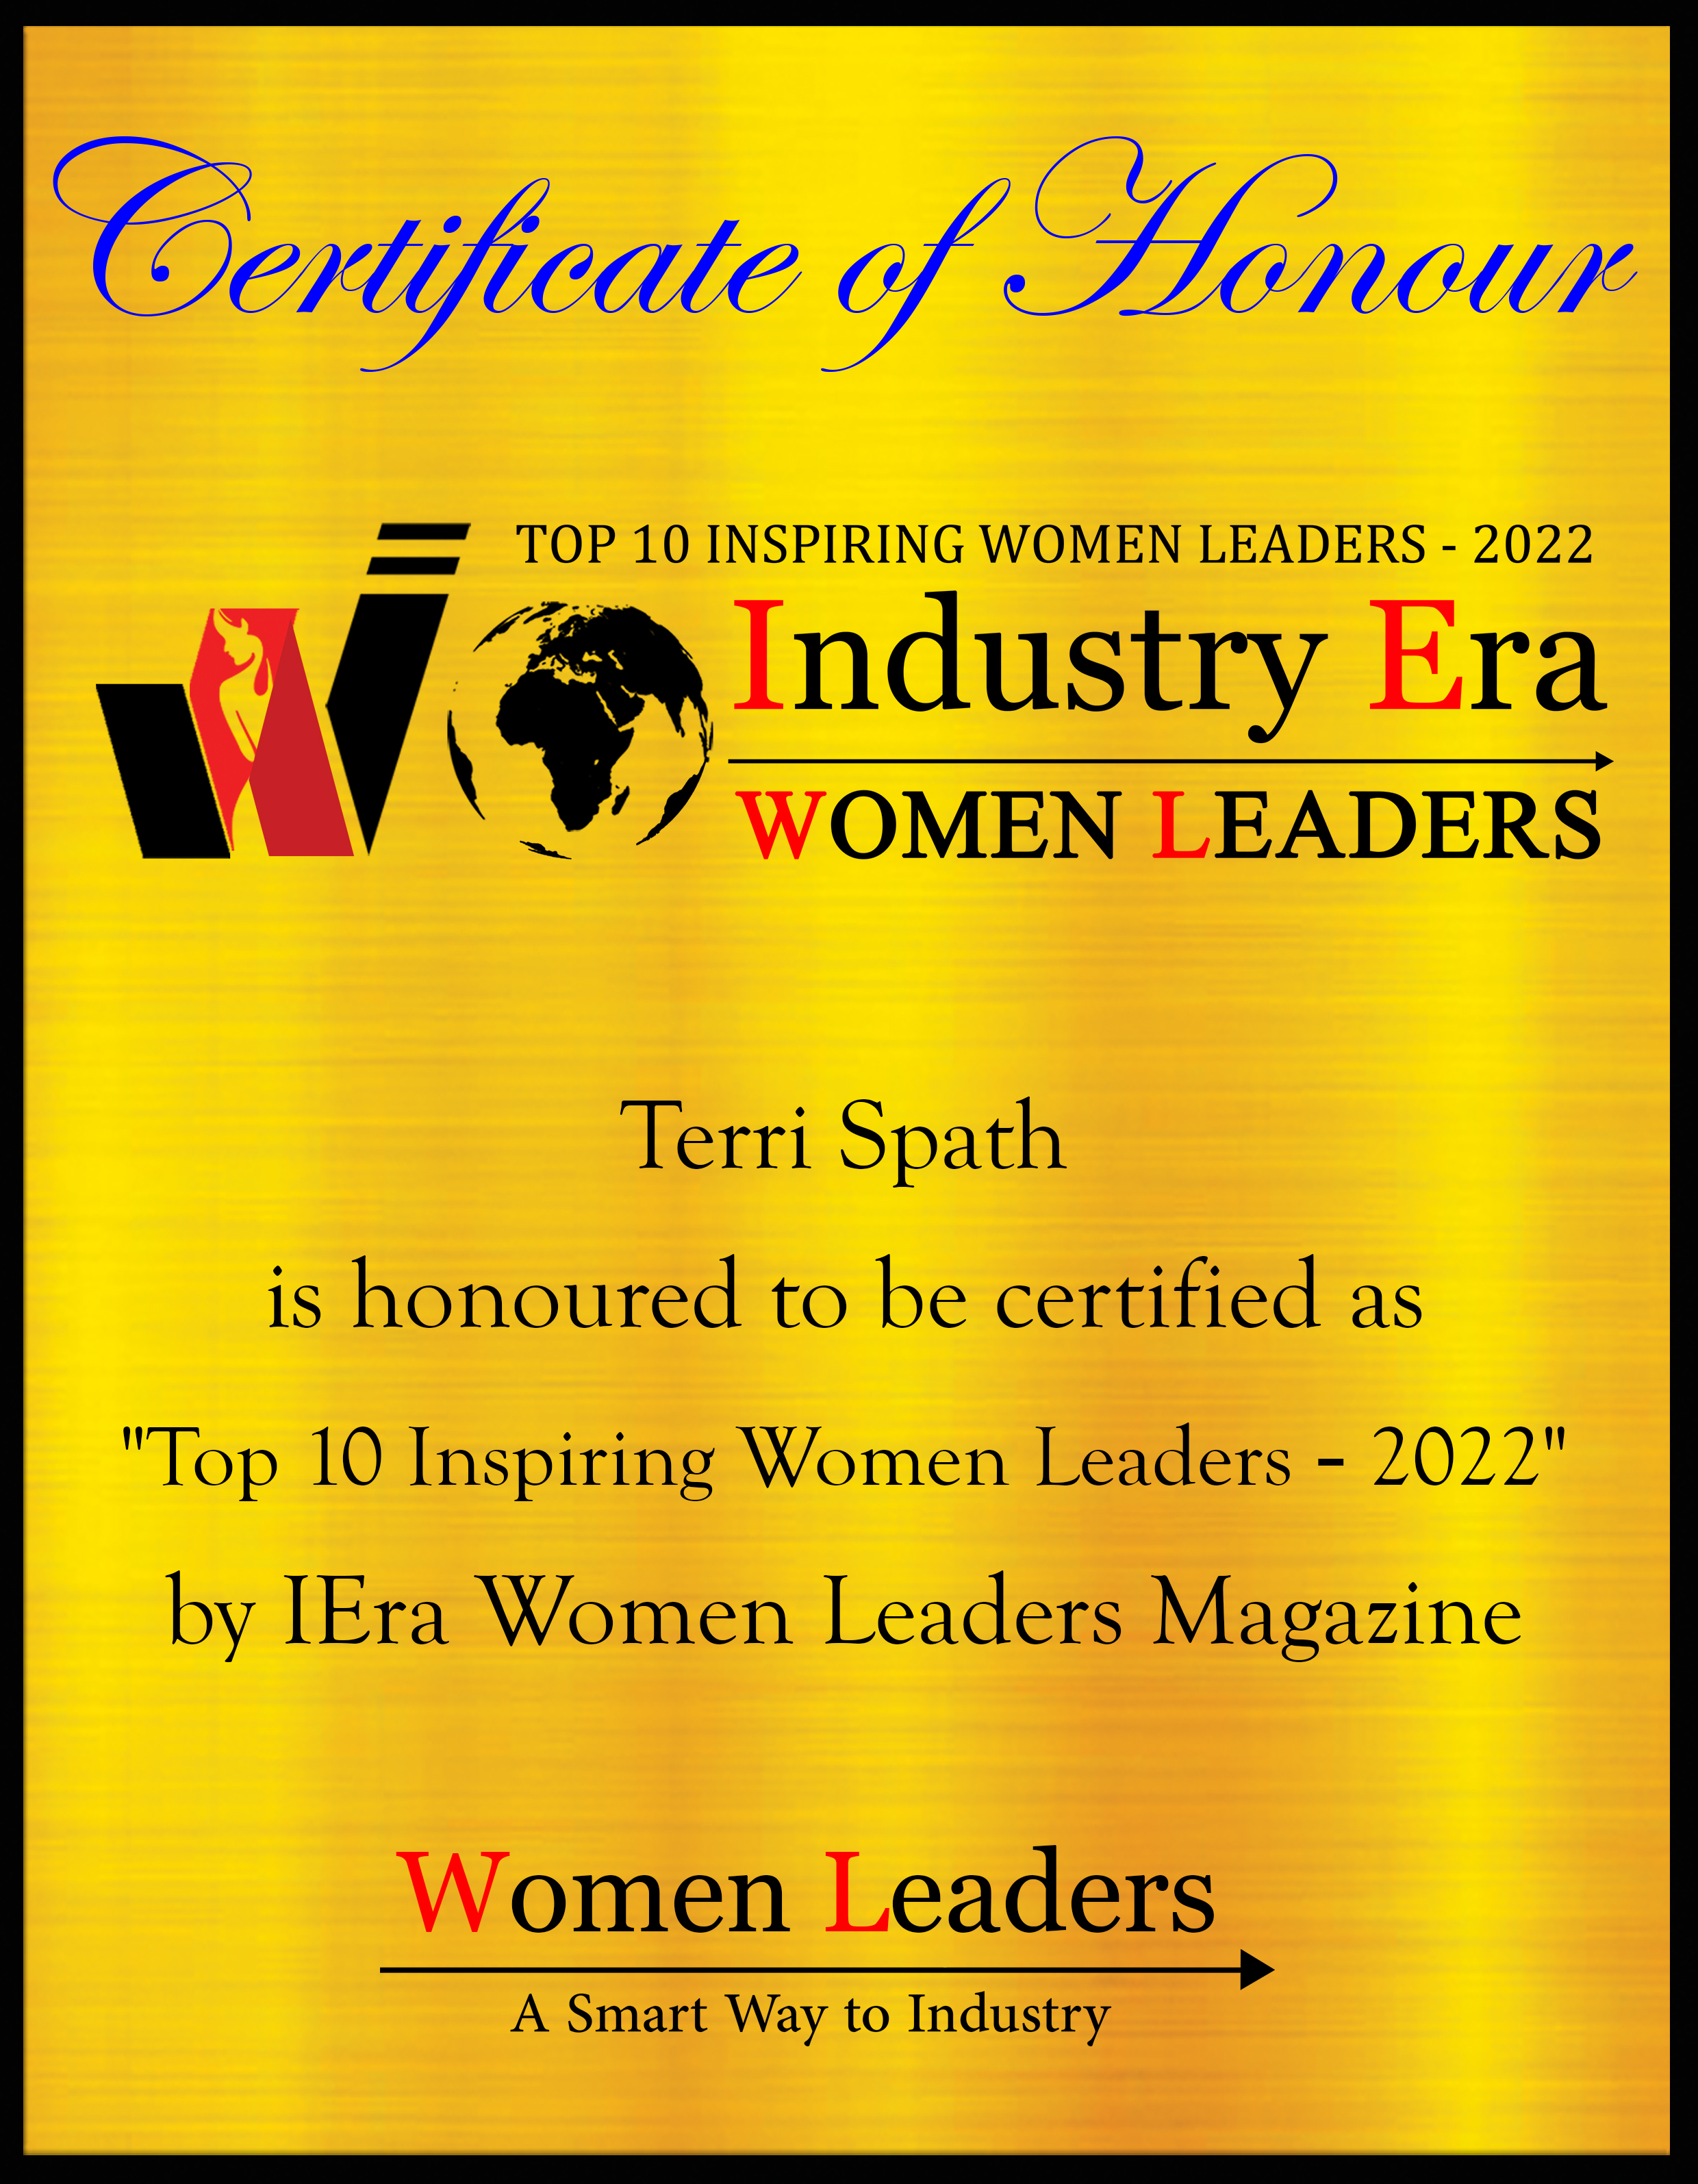 Terri Spath, CFA, CFP Founder & Chief Investment Officer of ZumaWealth, Top 10 Inspiring Women Leaders of 2022